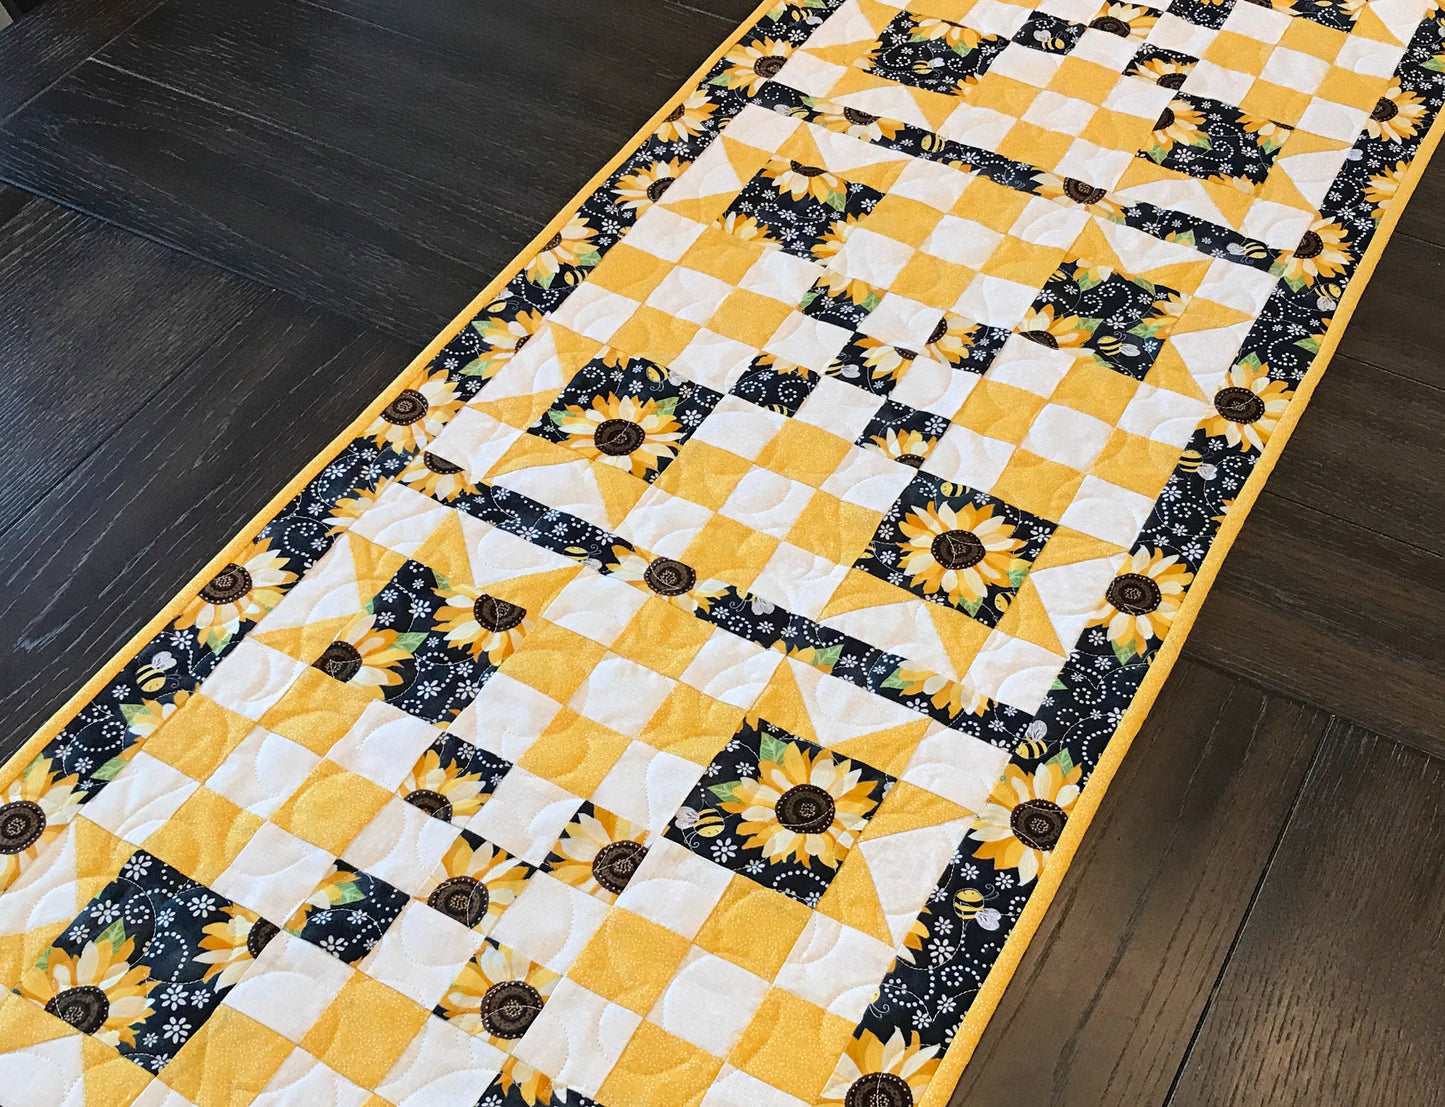 table runner displayed on a table for pattern for a table runner or table topper that has sawtooth star corner units with nine patch blocks in between.